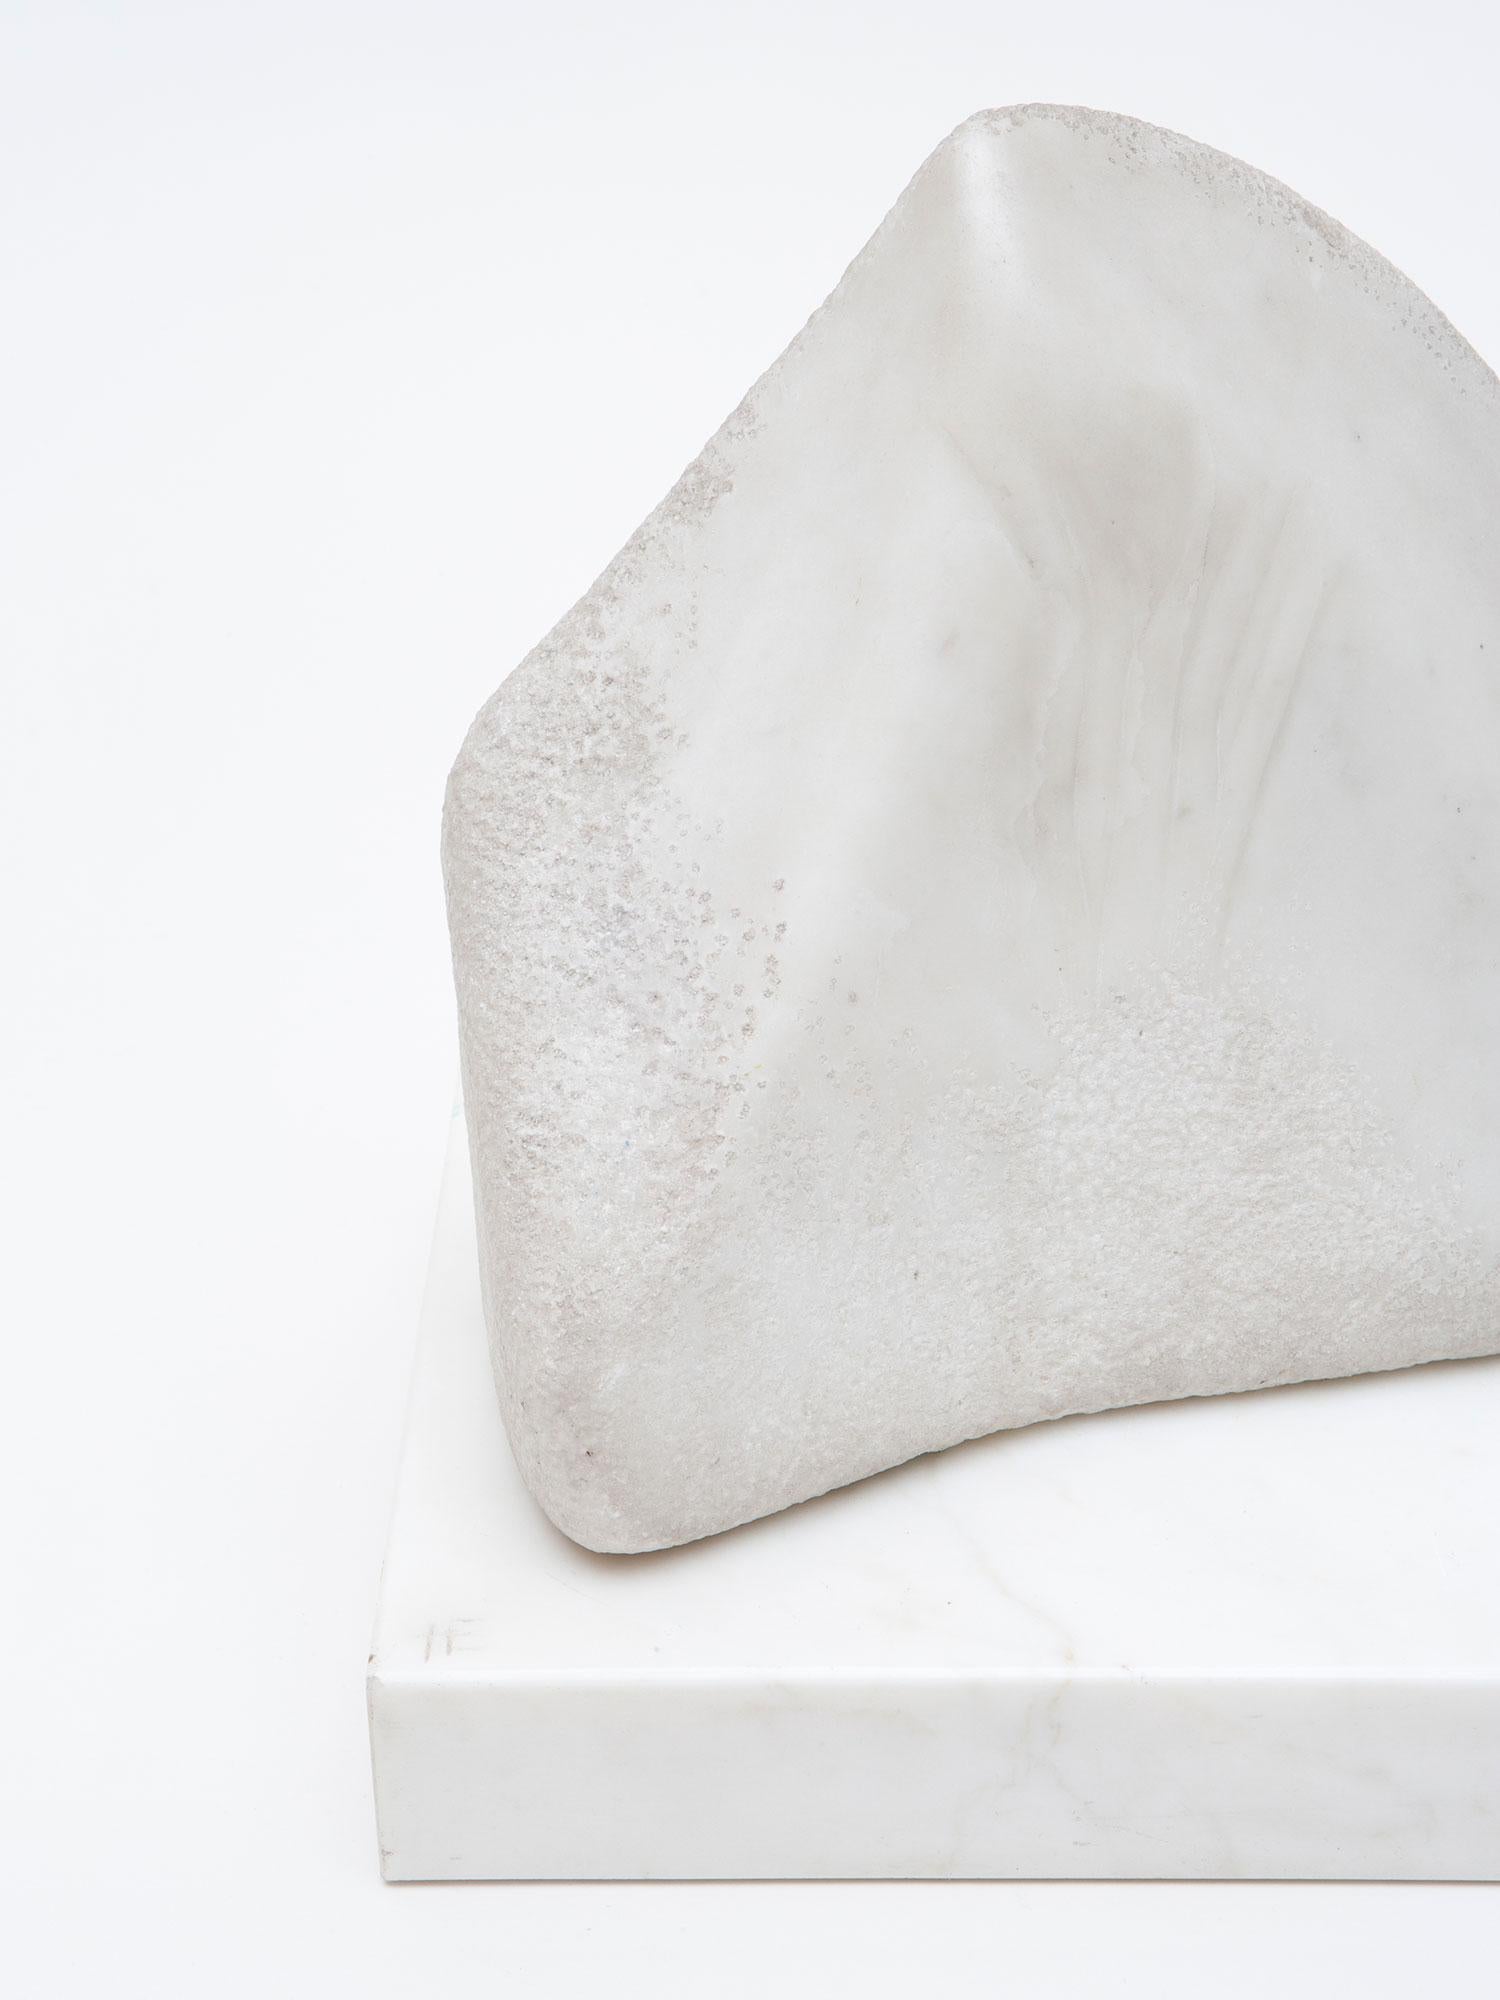 White Statuario Marble sculpture by Israeli-American artist Hanna Eshel (b. 1926). Hand carved in Carrara, Italy. Eshel is a multi-disciplinary artist best known for her work in carved marble, a skill she honed from 1972-1978 while living and